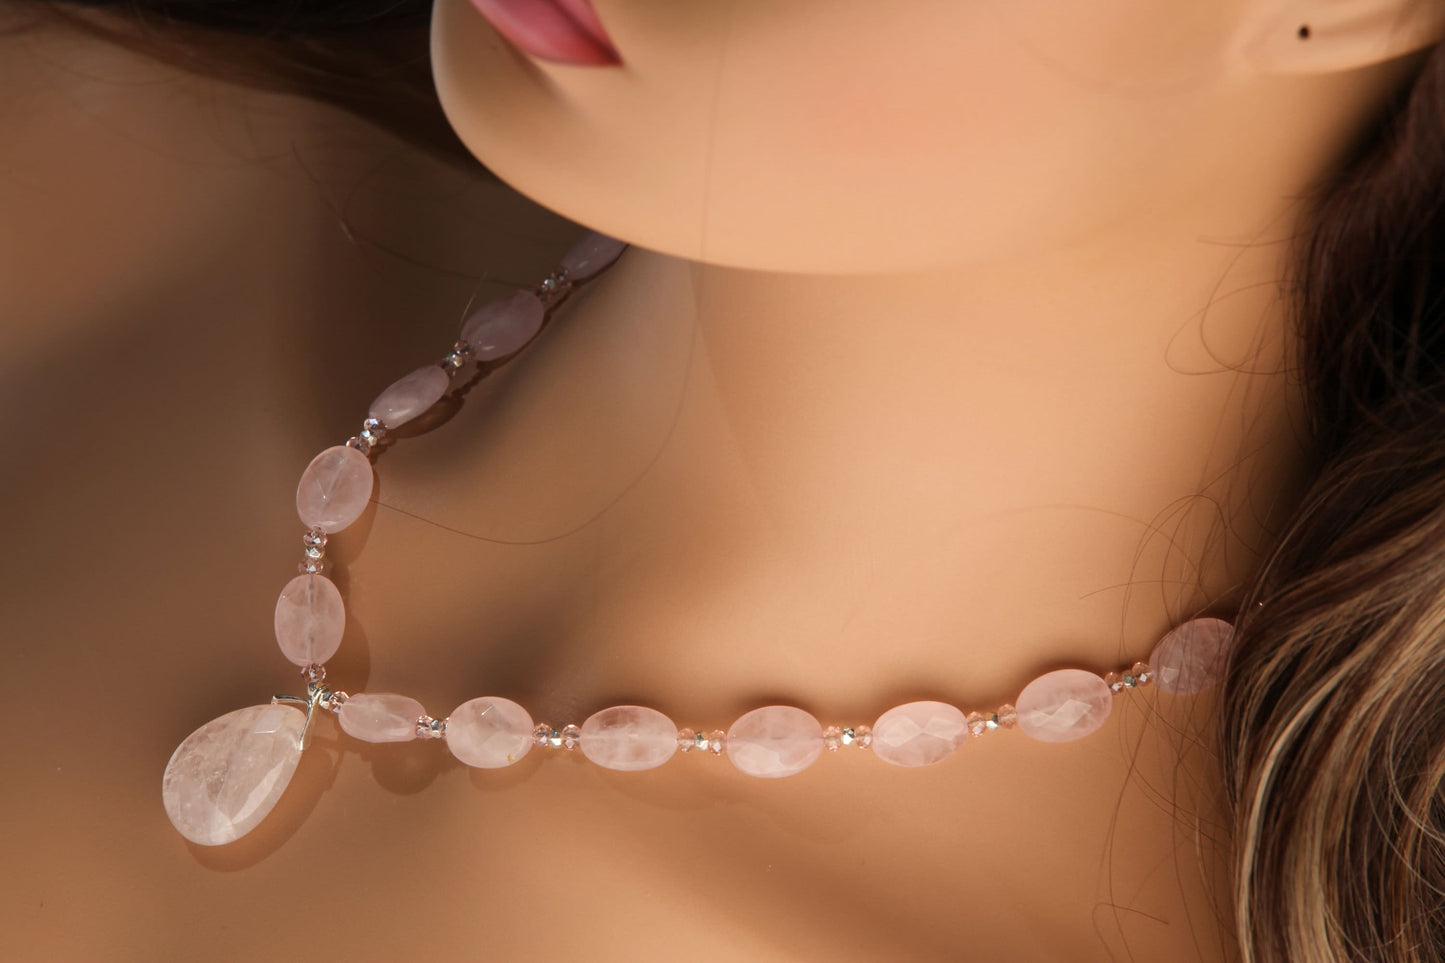 Madagascar Rose Quartz 10x14mm Faceted Oval with 18x25mm Faceted Teardrop Centerpiece Pendant 16" Necklace with 3" Extension Chain